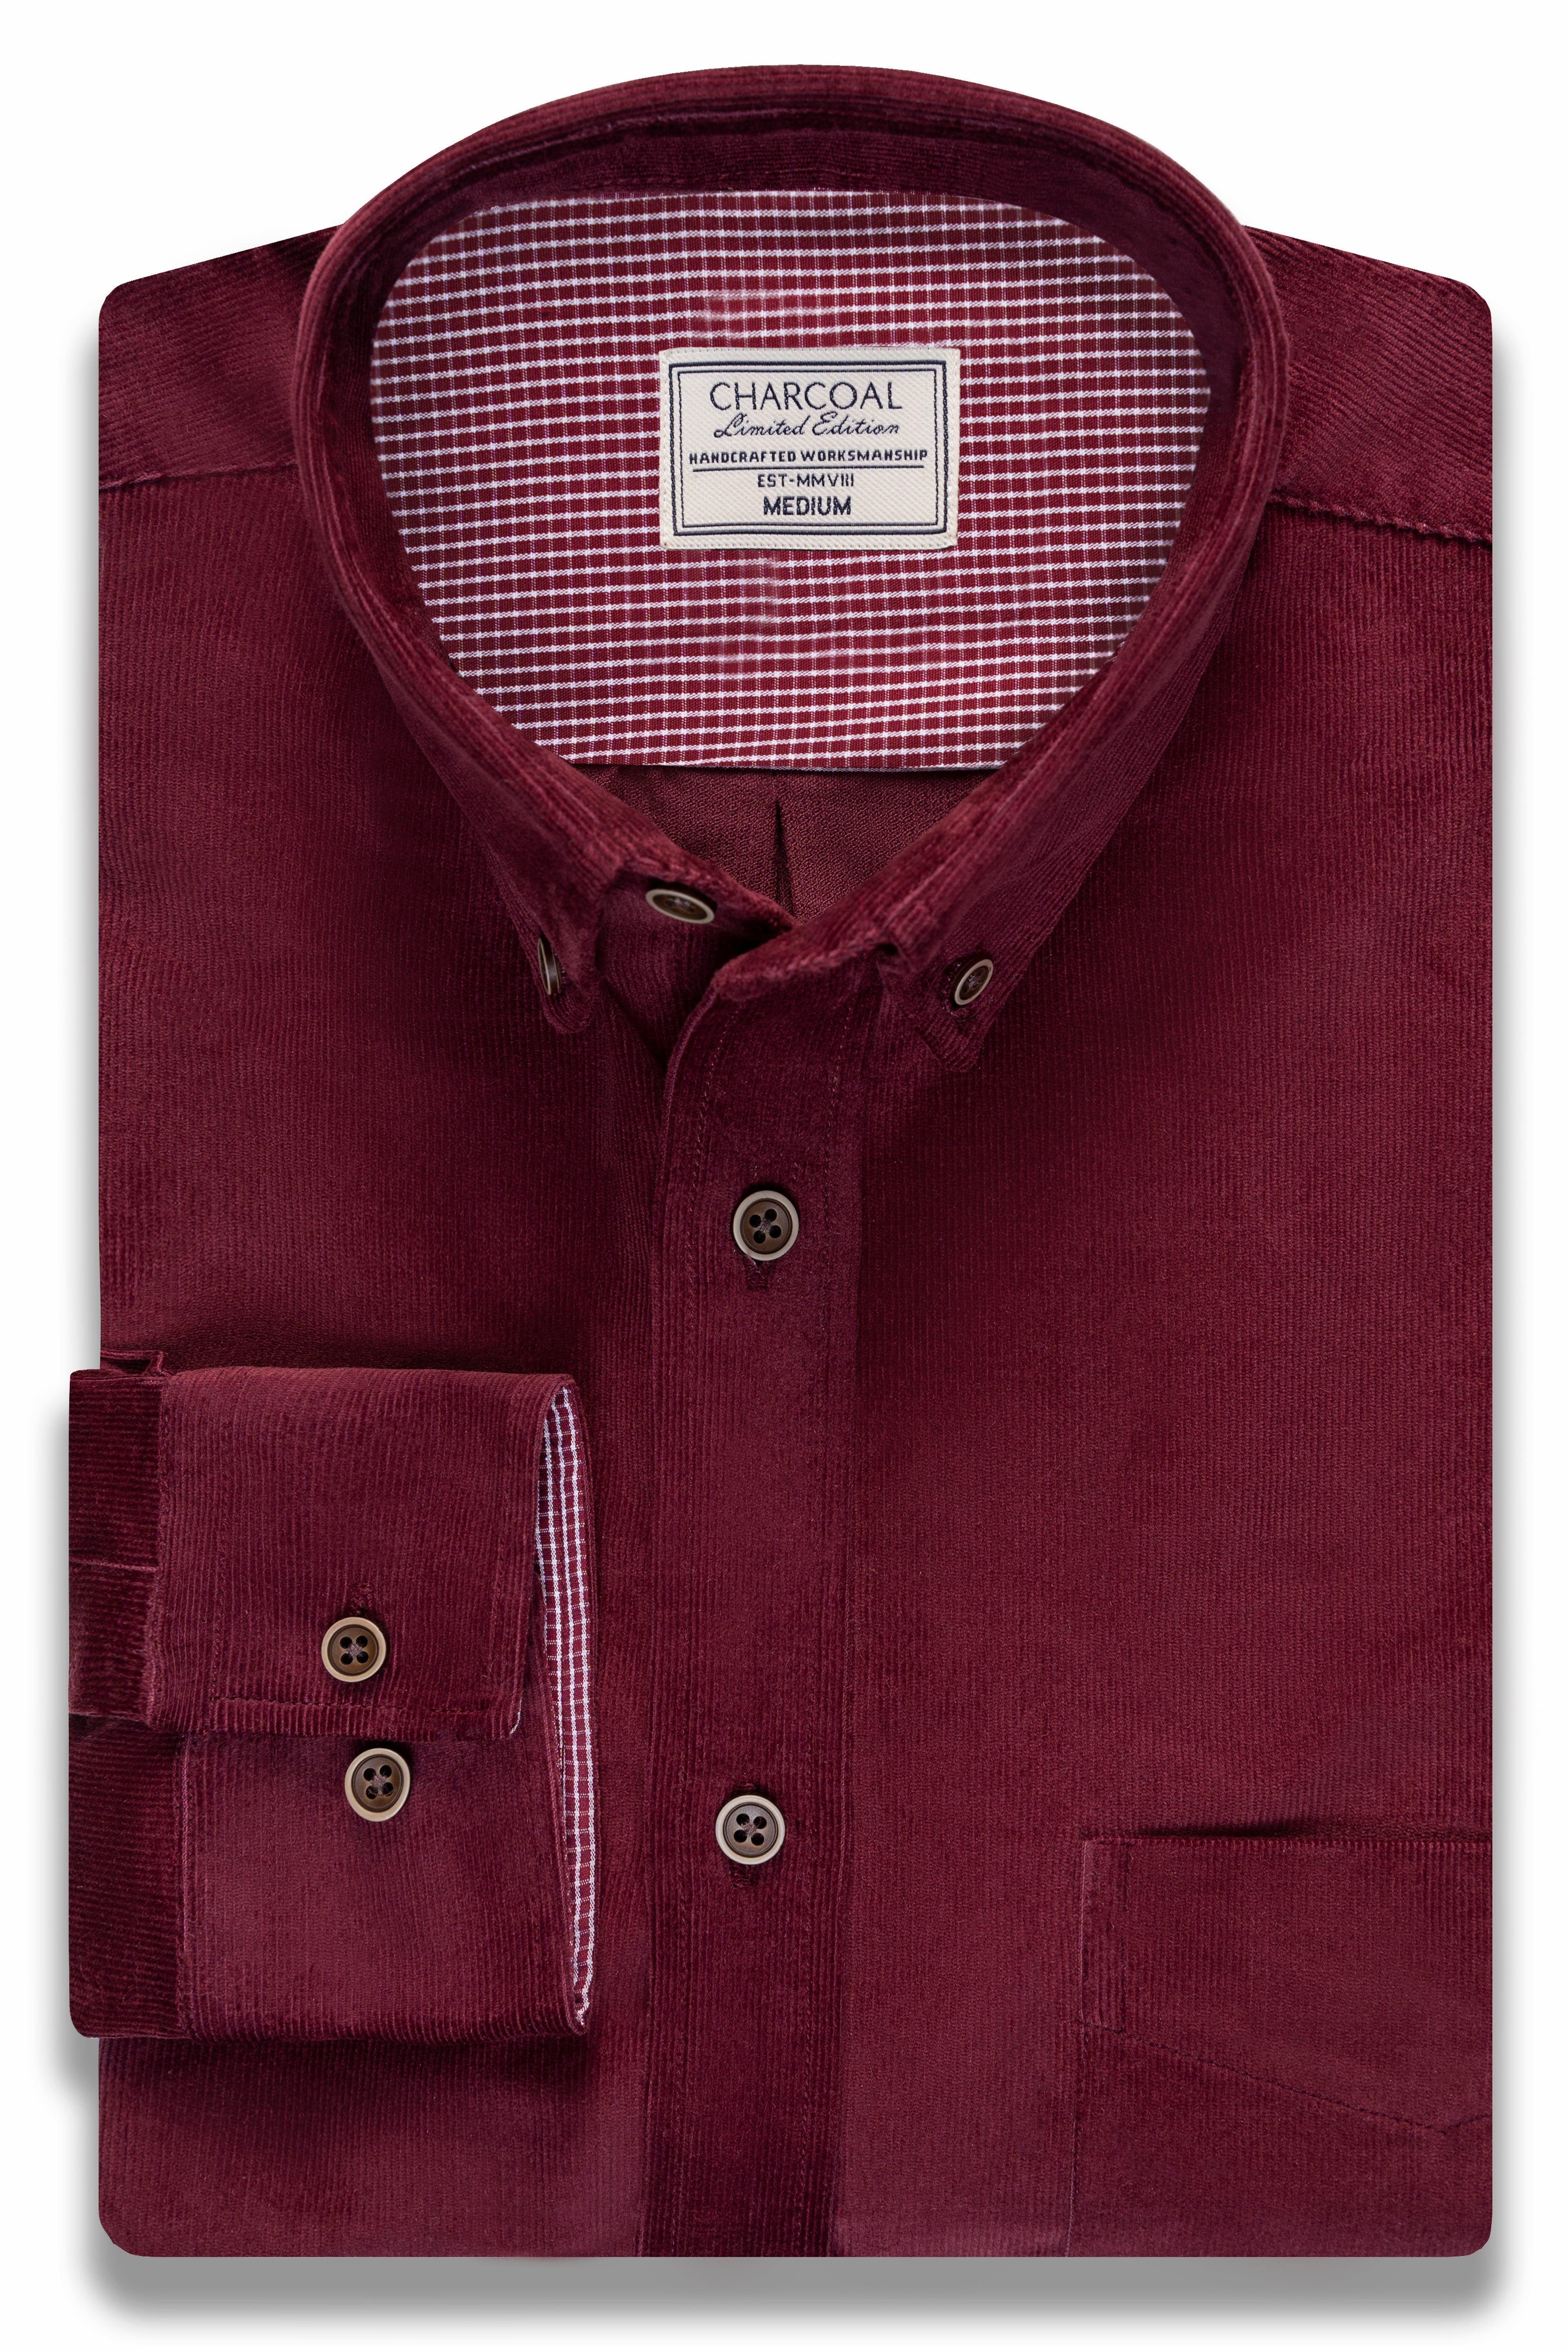 CORDUROY LIMITED EDITION SHIRT WINE RED